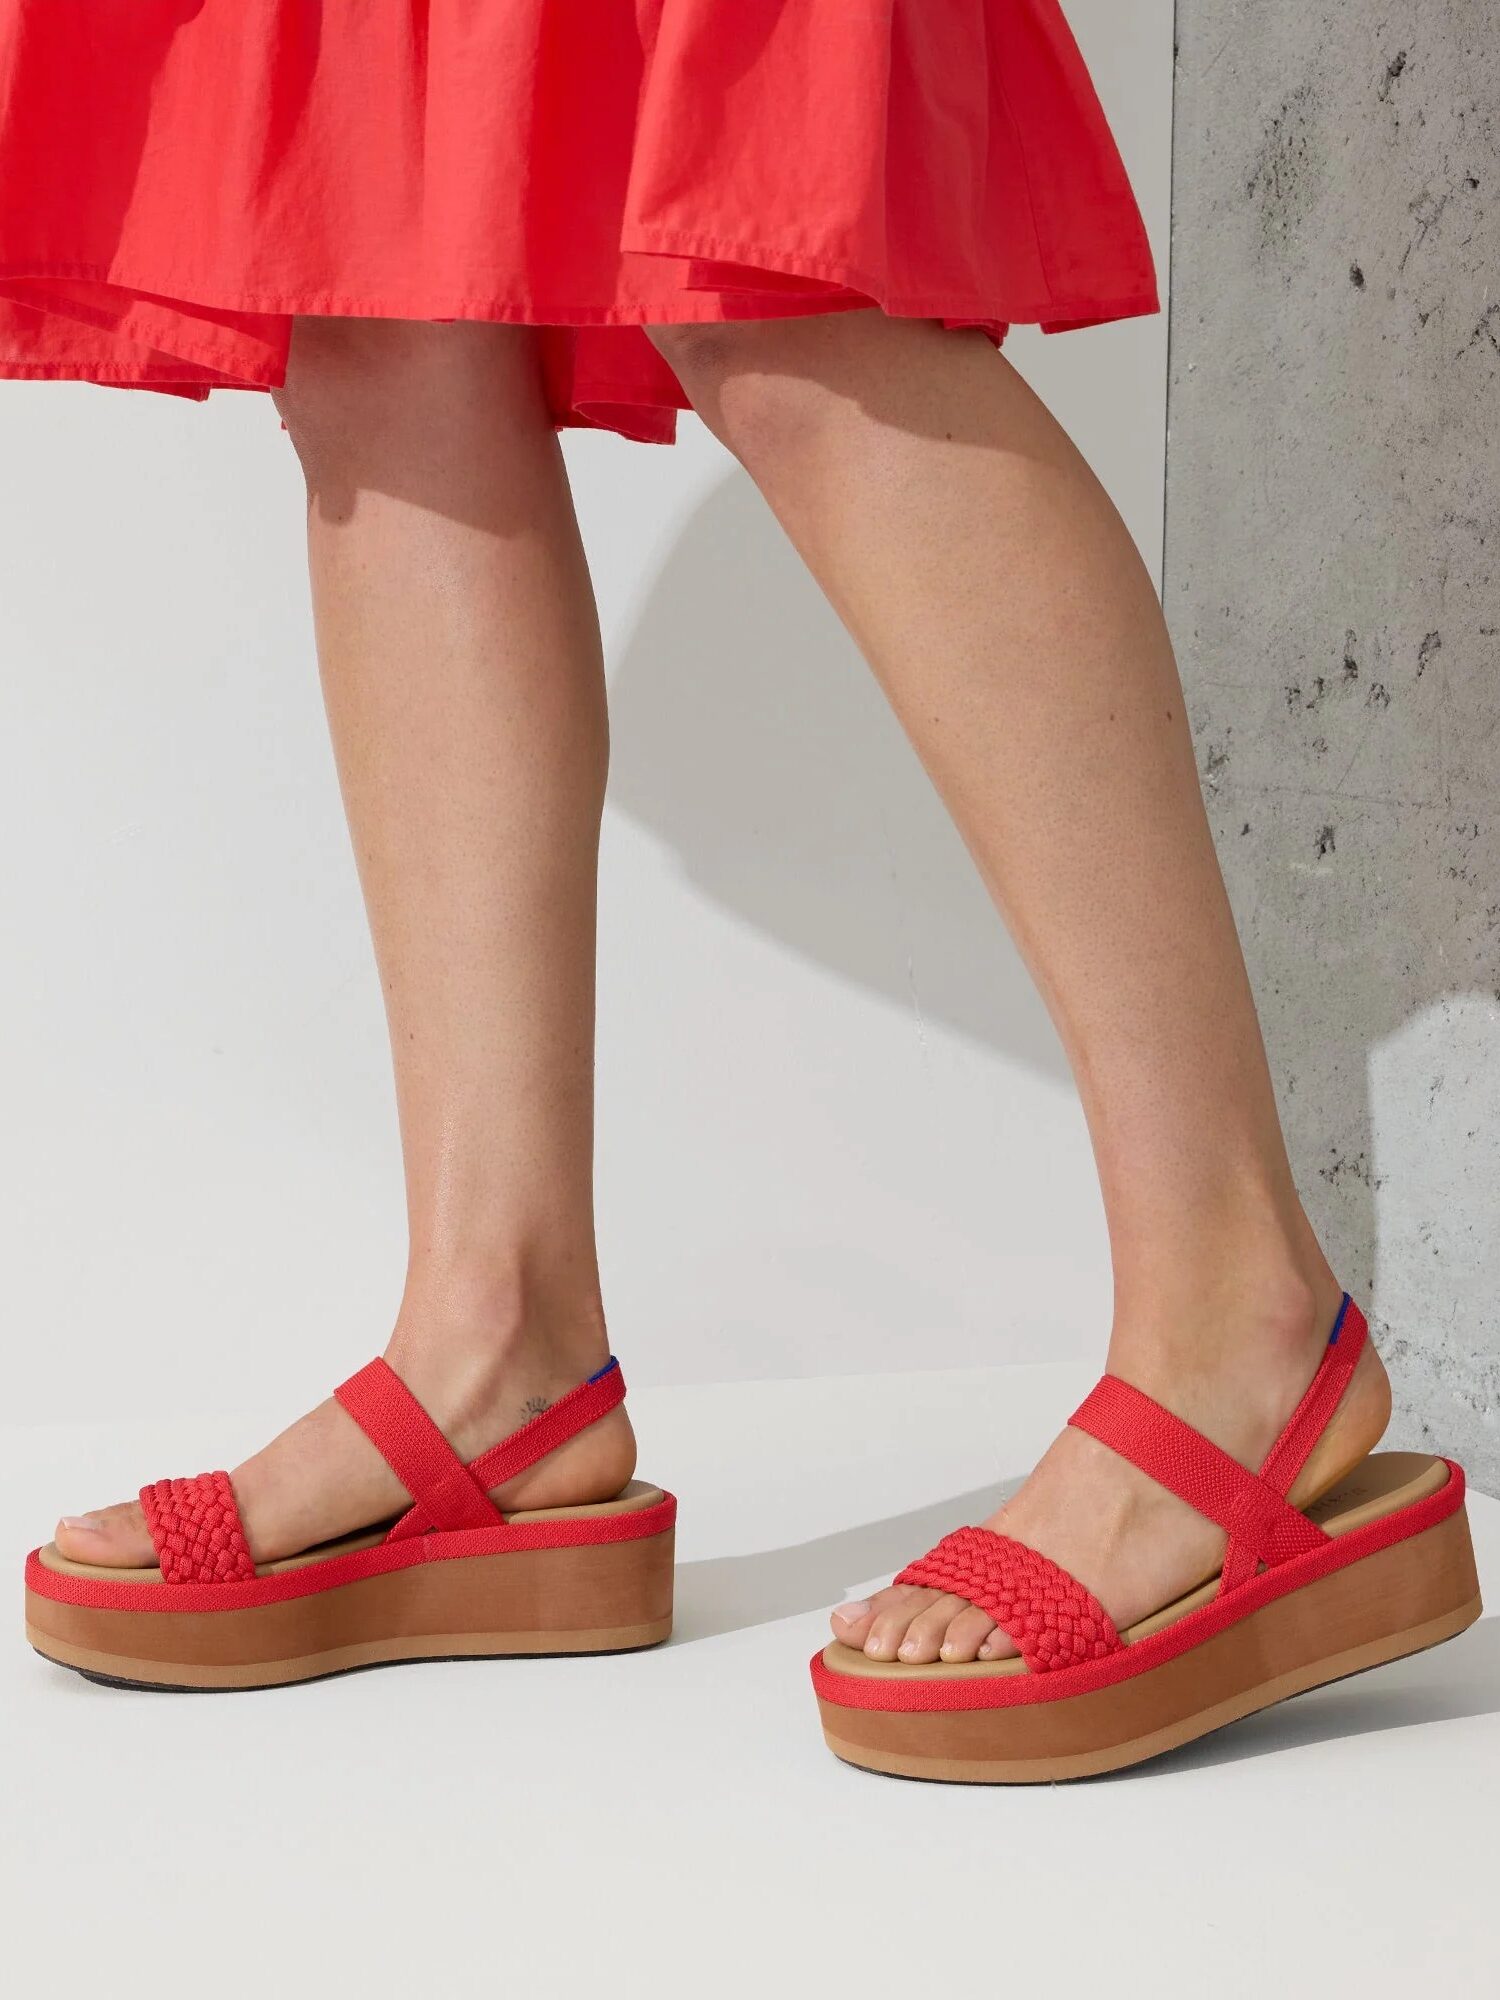 A person wearing red sandals and a red skirt stands on a concrete surface. The sandals have a thick wooden sole and woven straps.